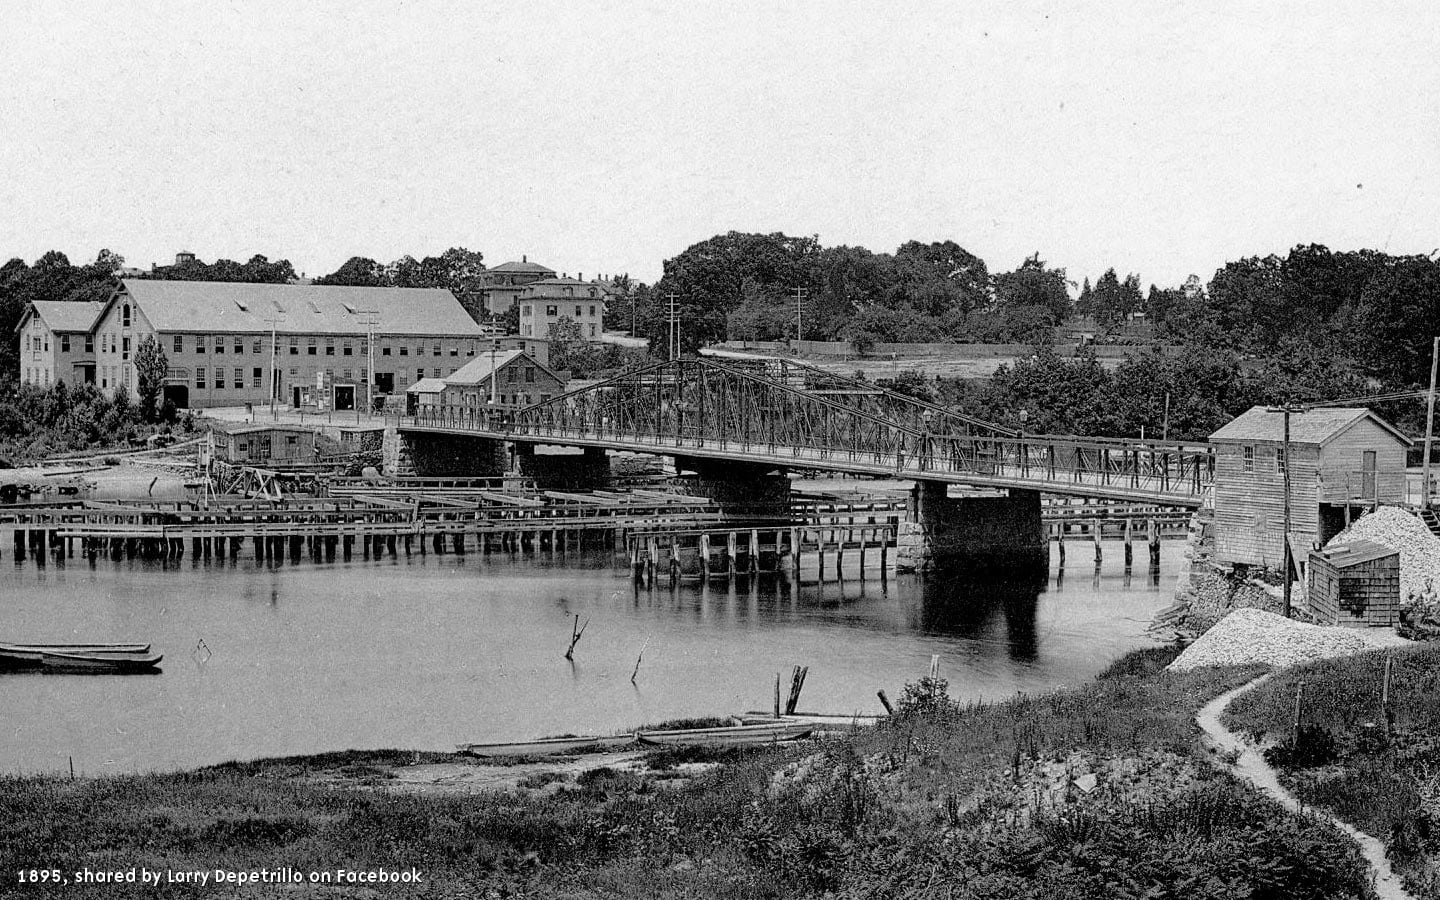 A steel girder swing bridge spanning three hundred ninety feet over the Seekonk River, once connecting Waterman Street in Providence with Waterman Avenue in East Providence